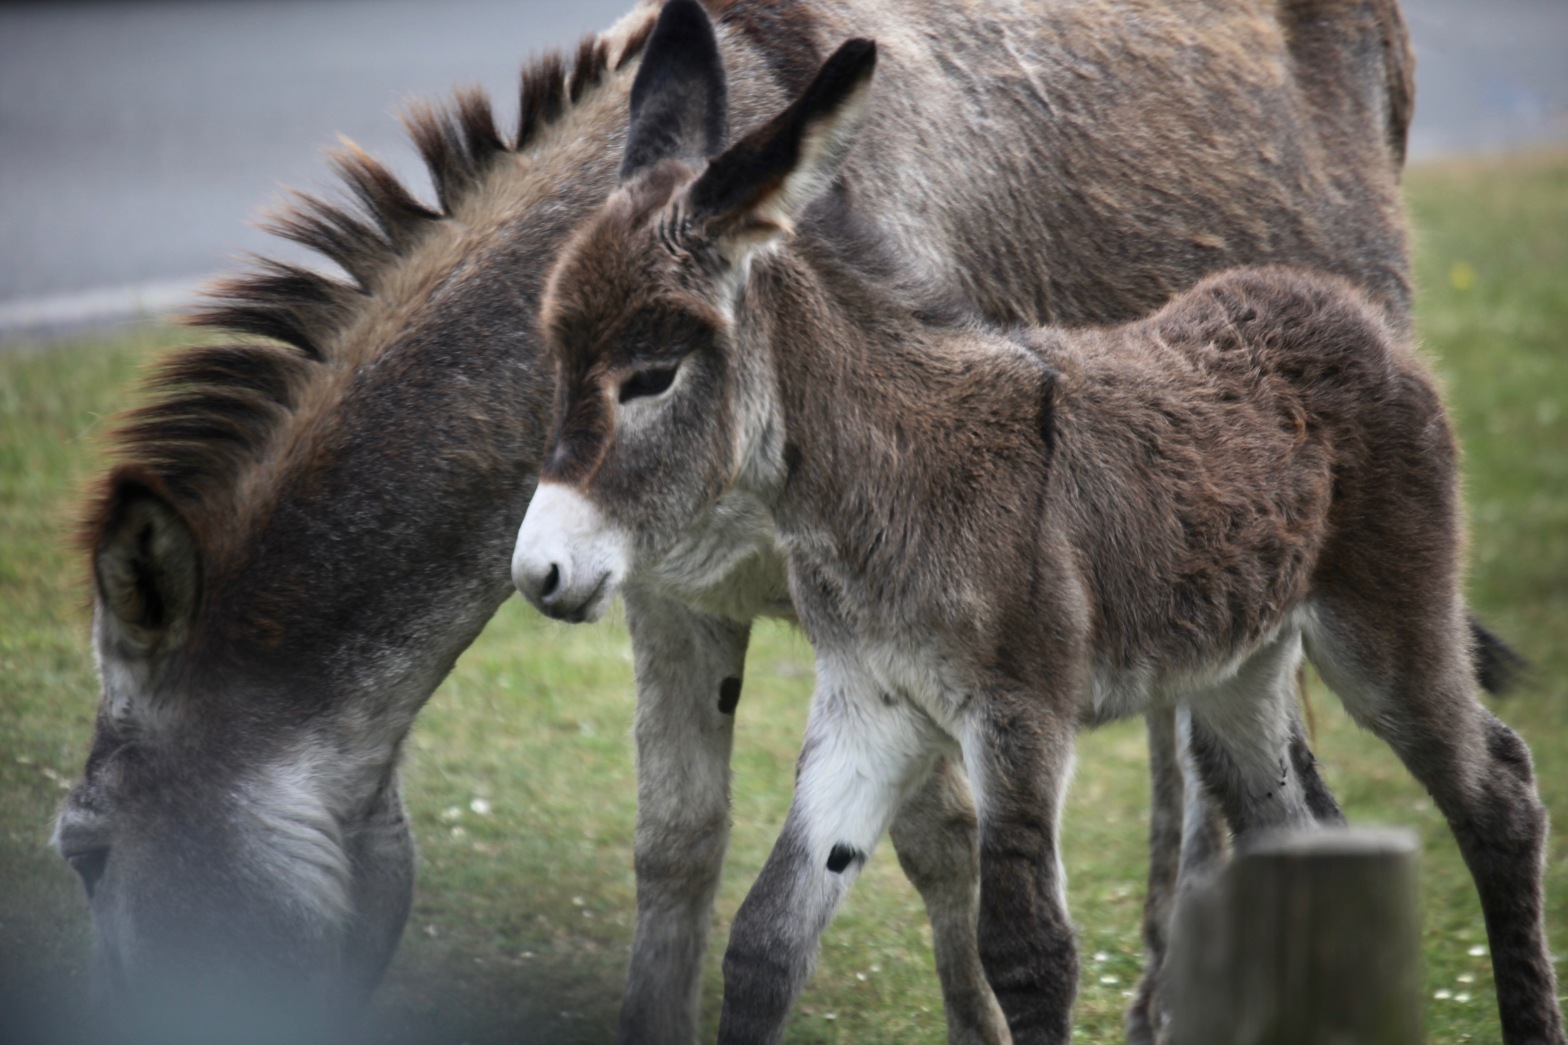 Donkey and foal